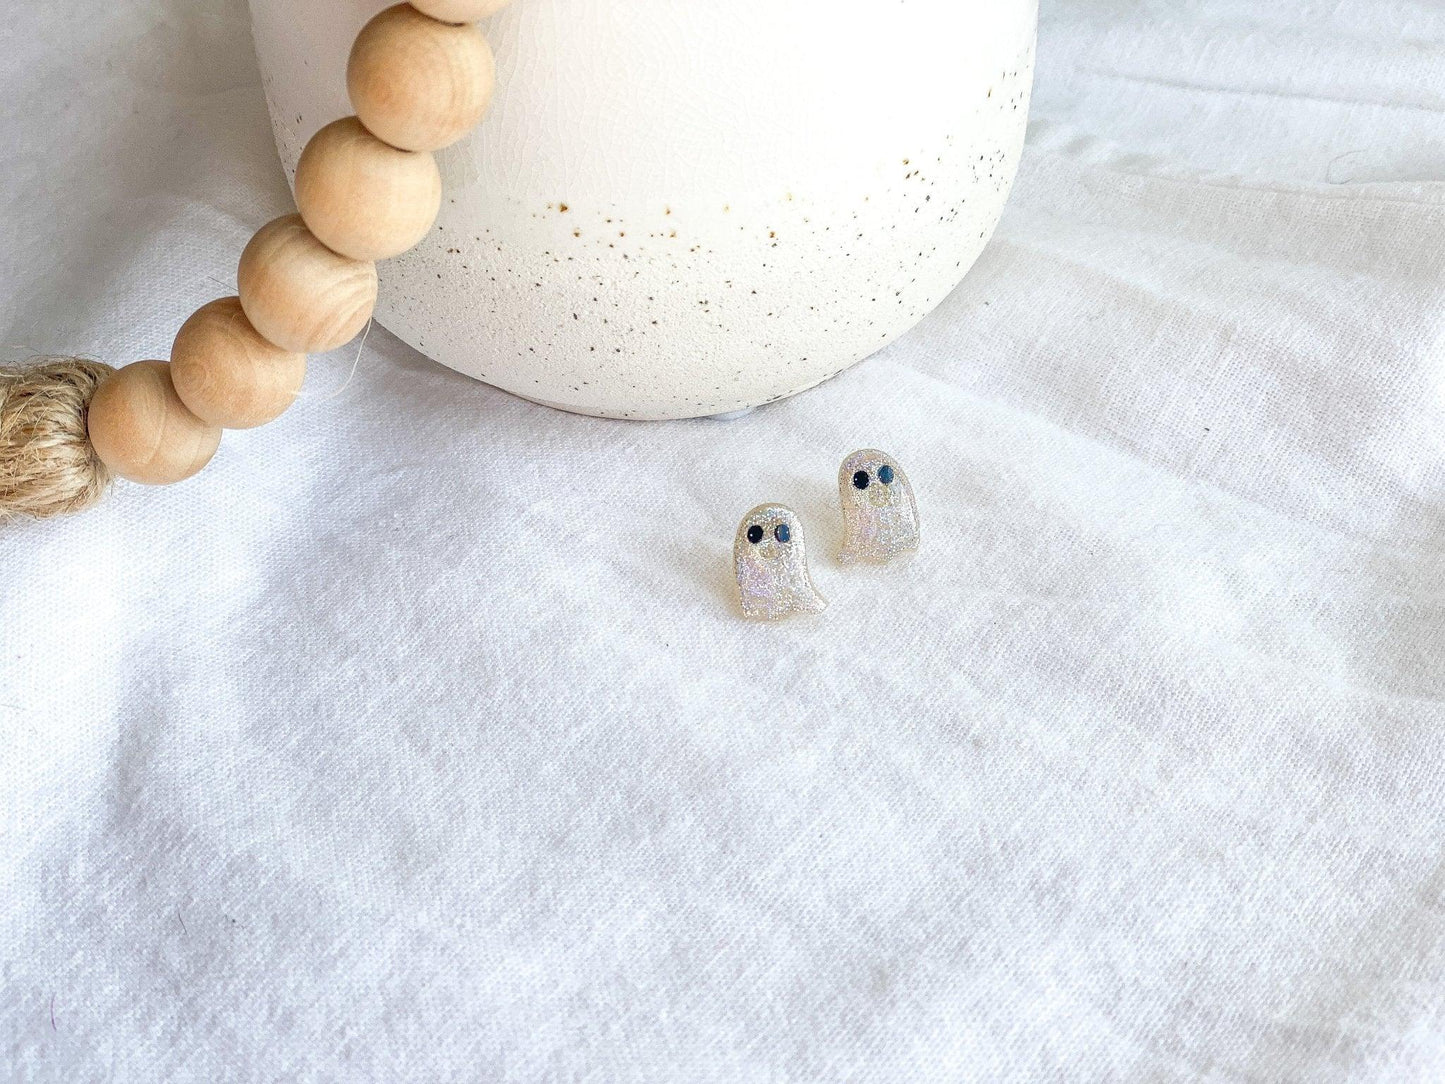 Sparkly Ghost Stud Earrings, Polymer Clay, Surgical Steel, Handmade - Harbor to Gulf Co.